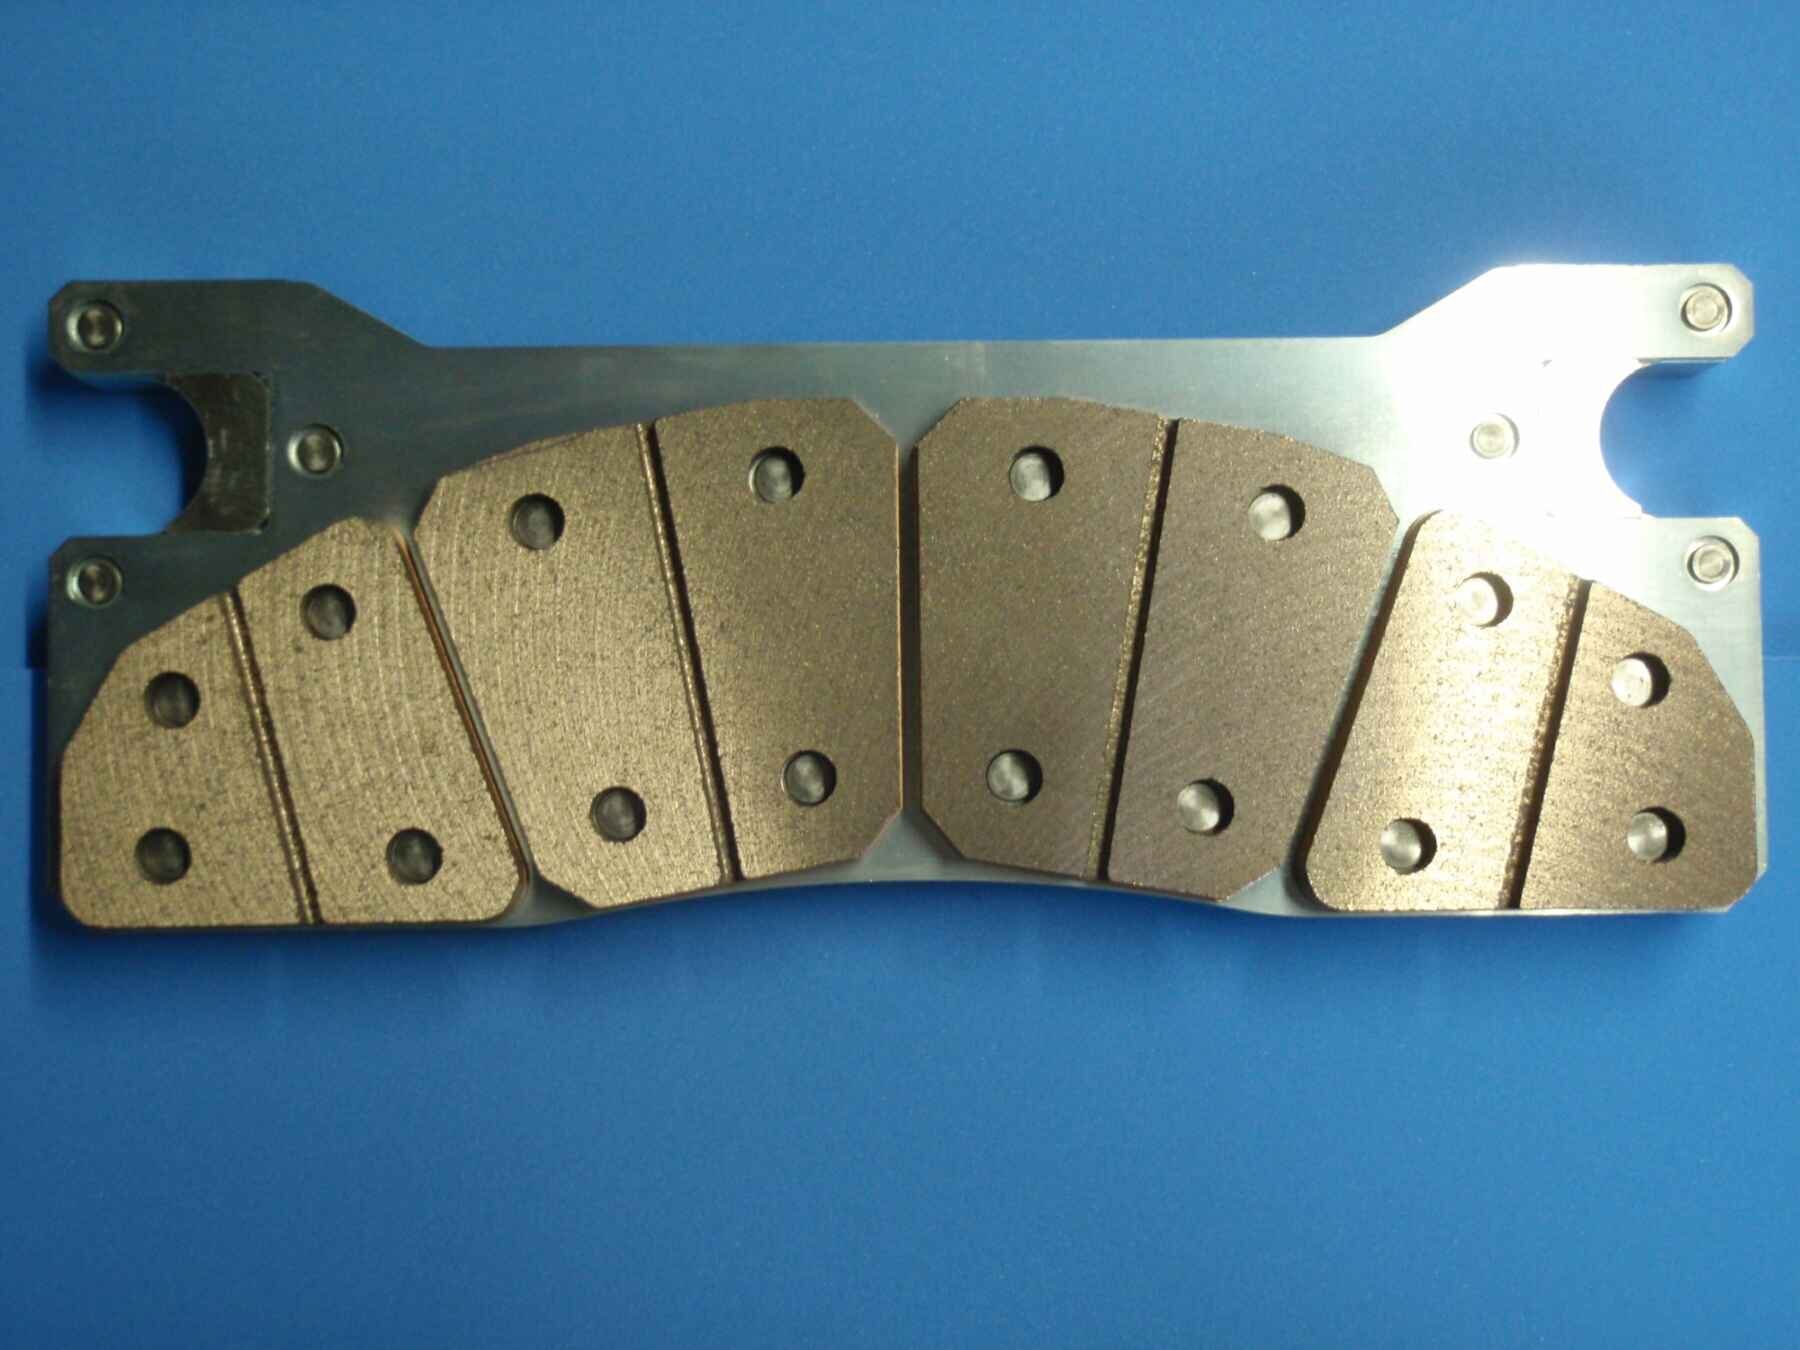 Sintered brake lining for high-speed railway vehicles on conventional lines